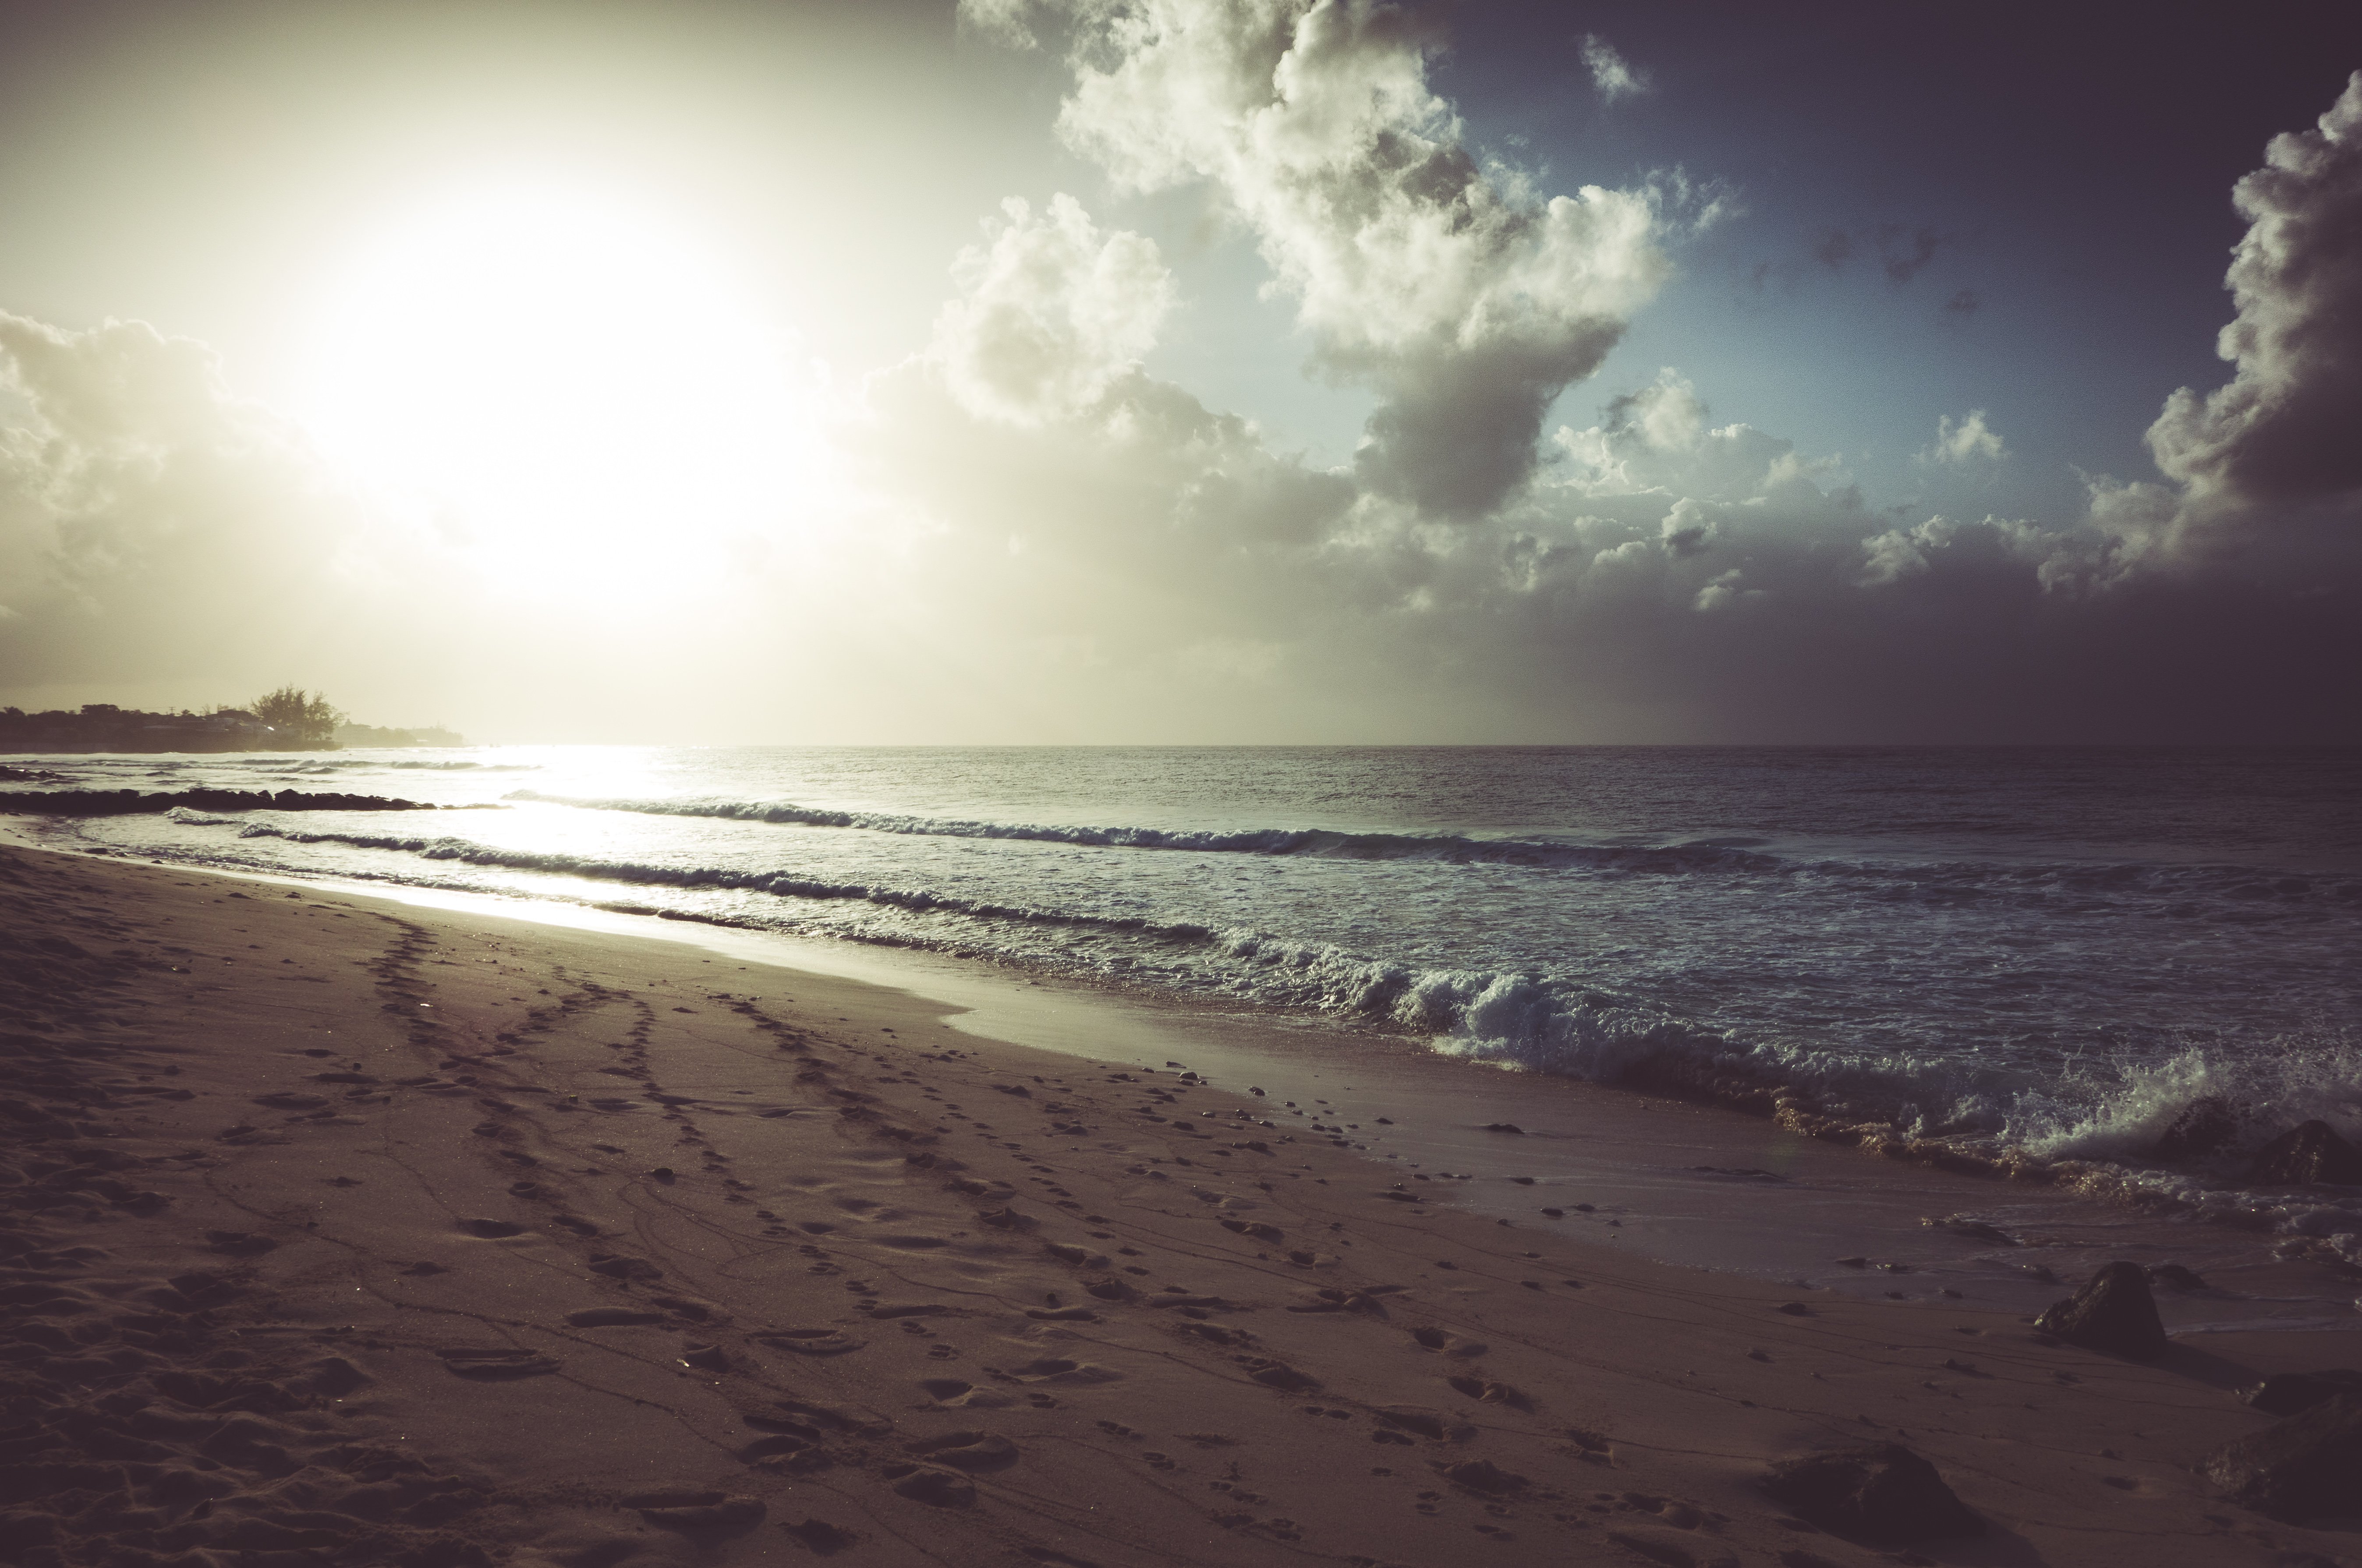 Wallpaper, ocean, Sun, beach, clouds, evening, sand, faded, Barbados, footsteps 5391x3579